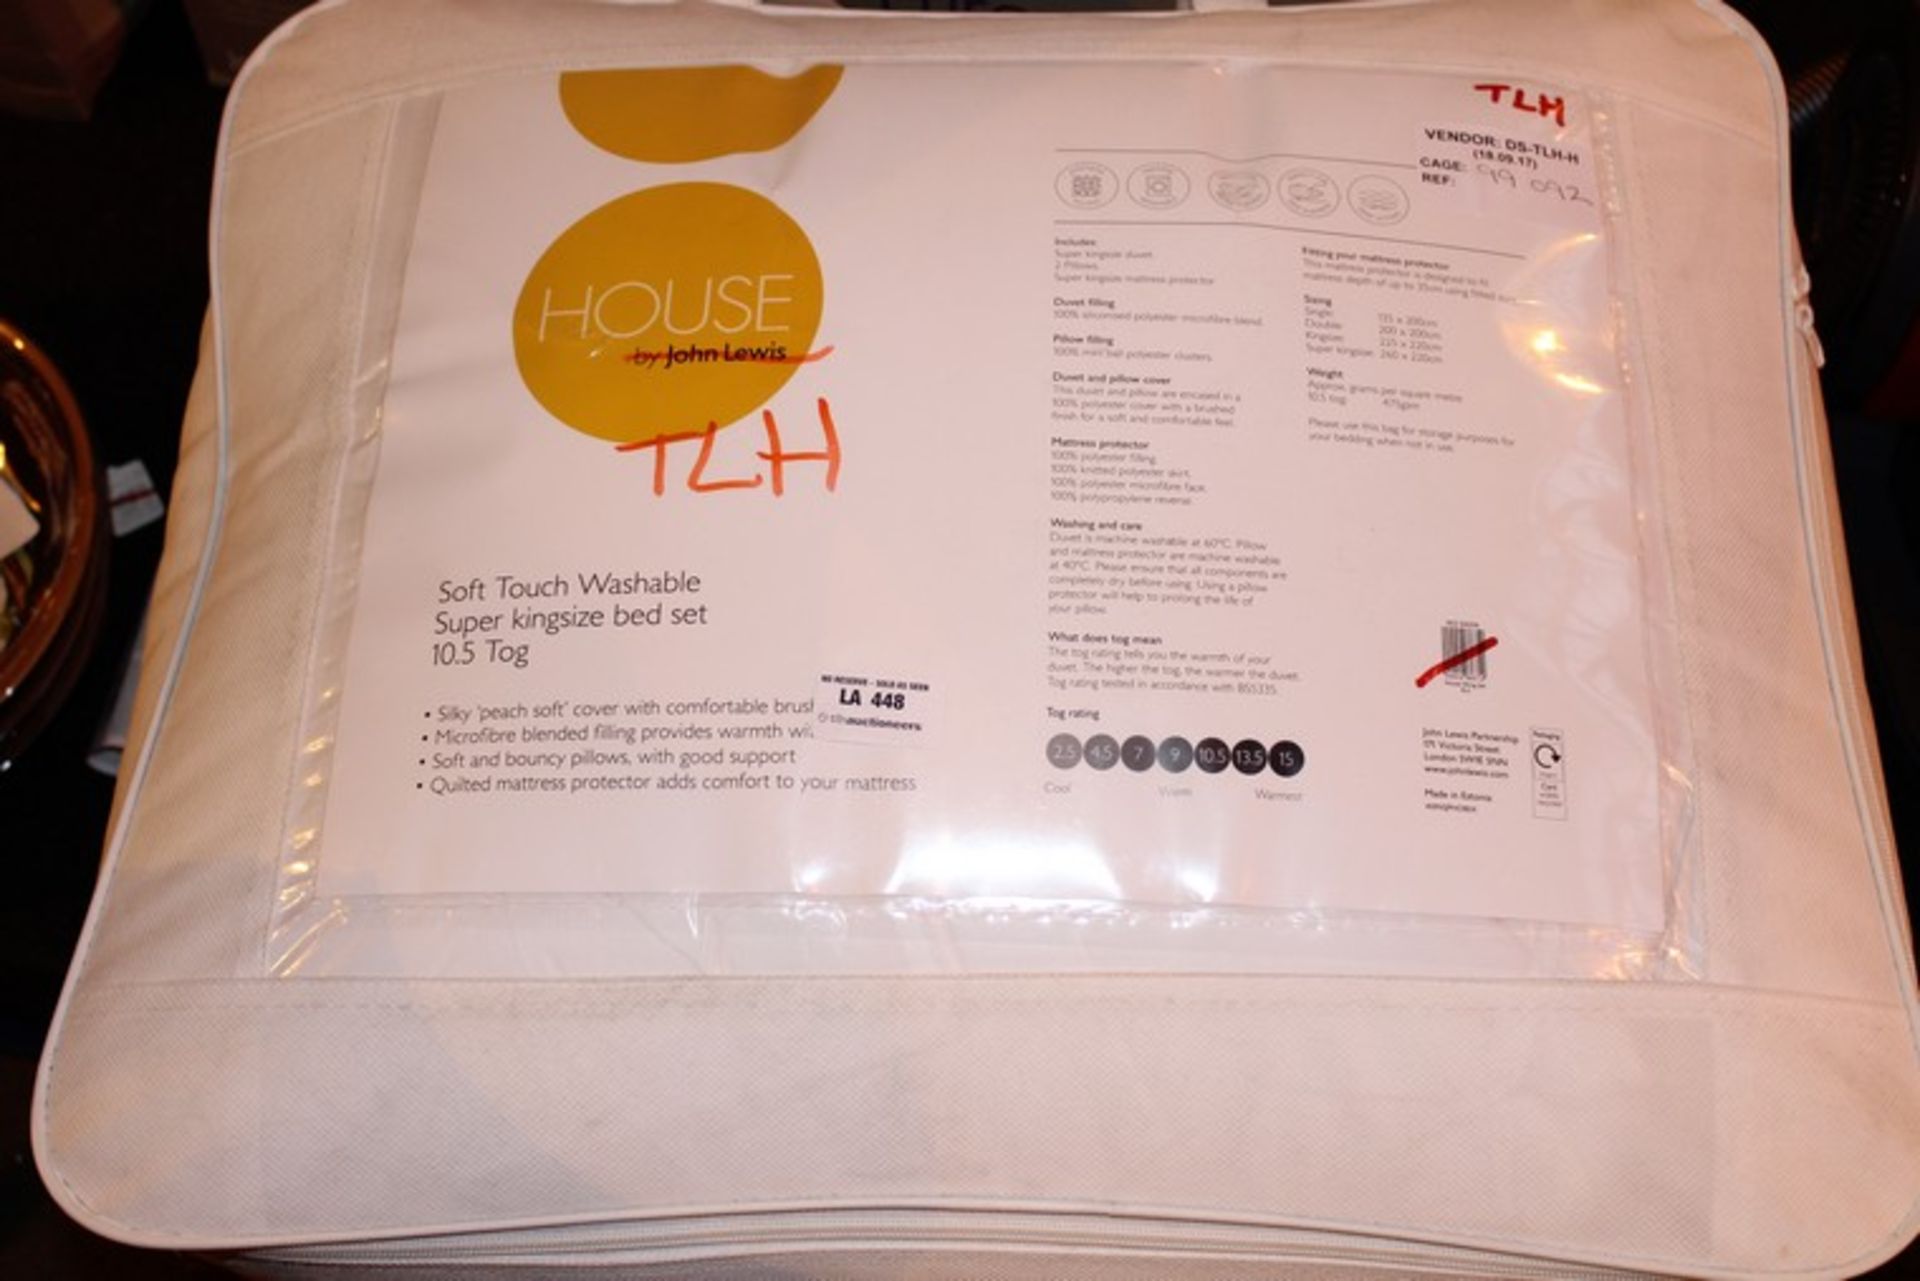 1 x BAGGED SOFT TOUCH WASHABLE SUPER KING SIZE BED SET 10.5TOG RRP £100 (18.09.17) (99.092) *